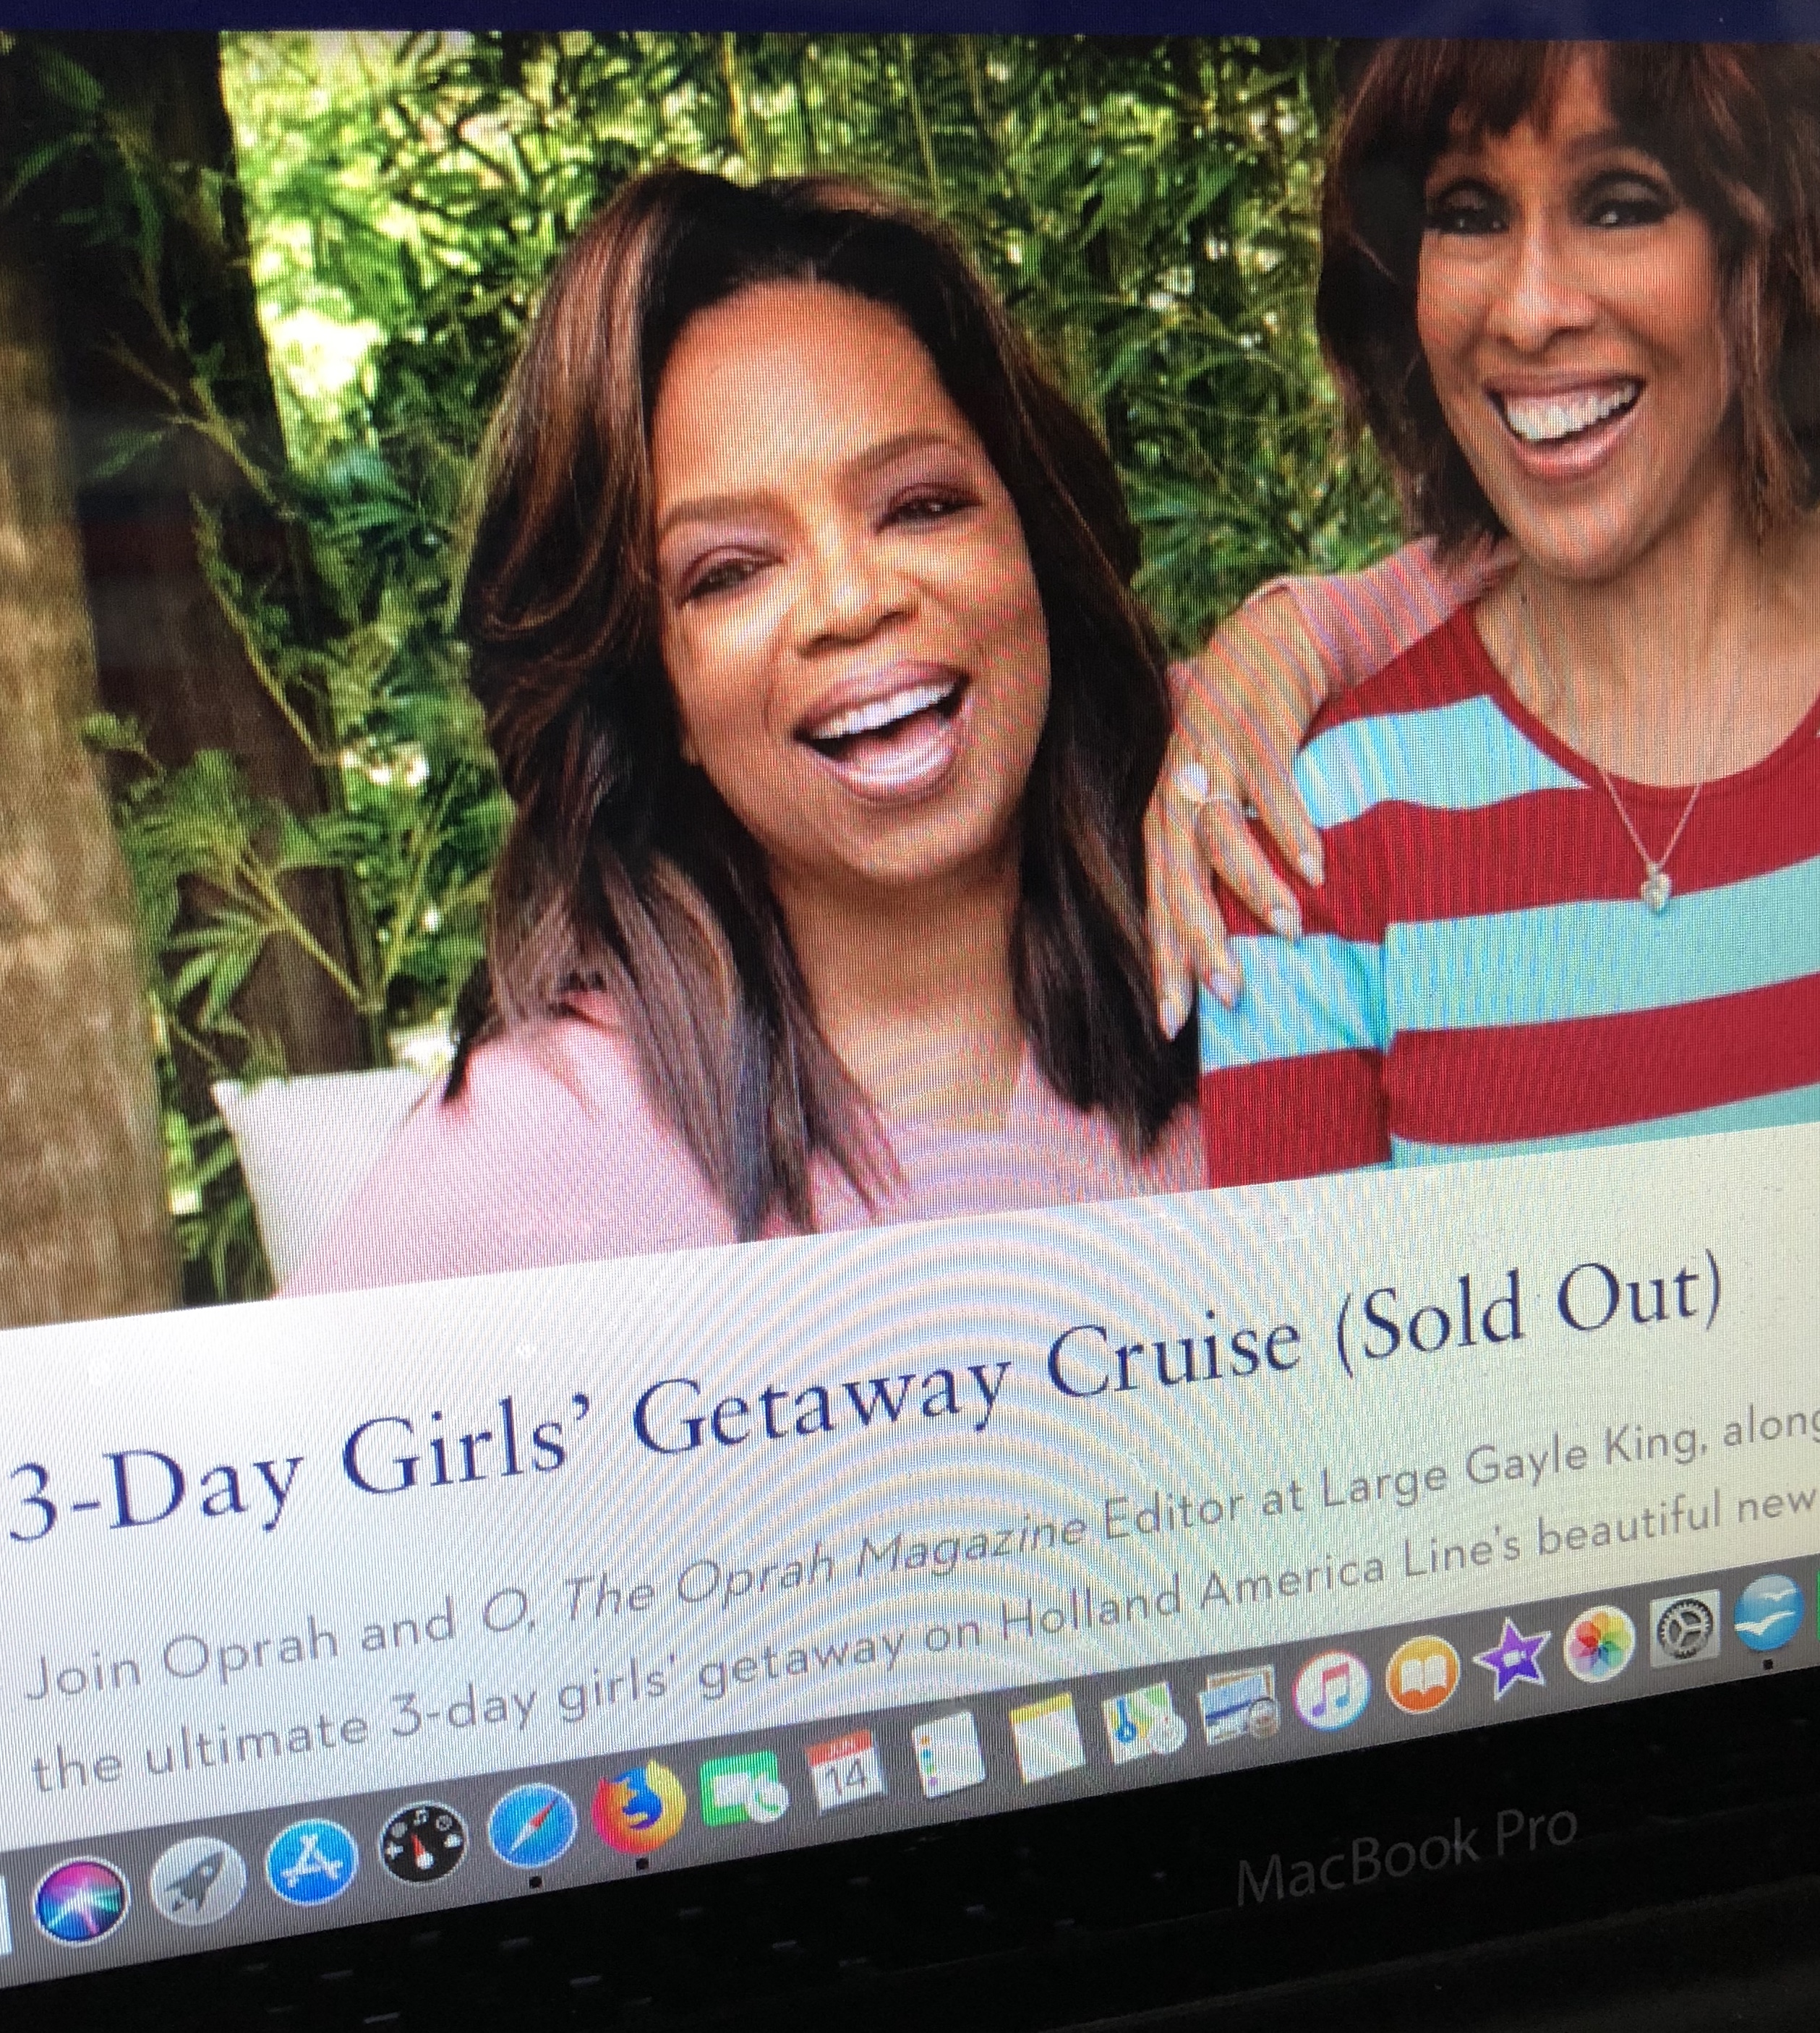 Cruise with Oprah & O Magazine on the Ultimate Girls’ Getaway